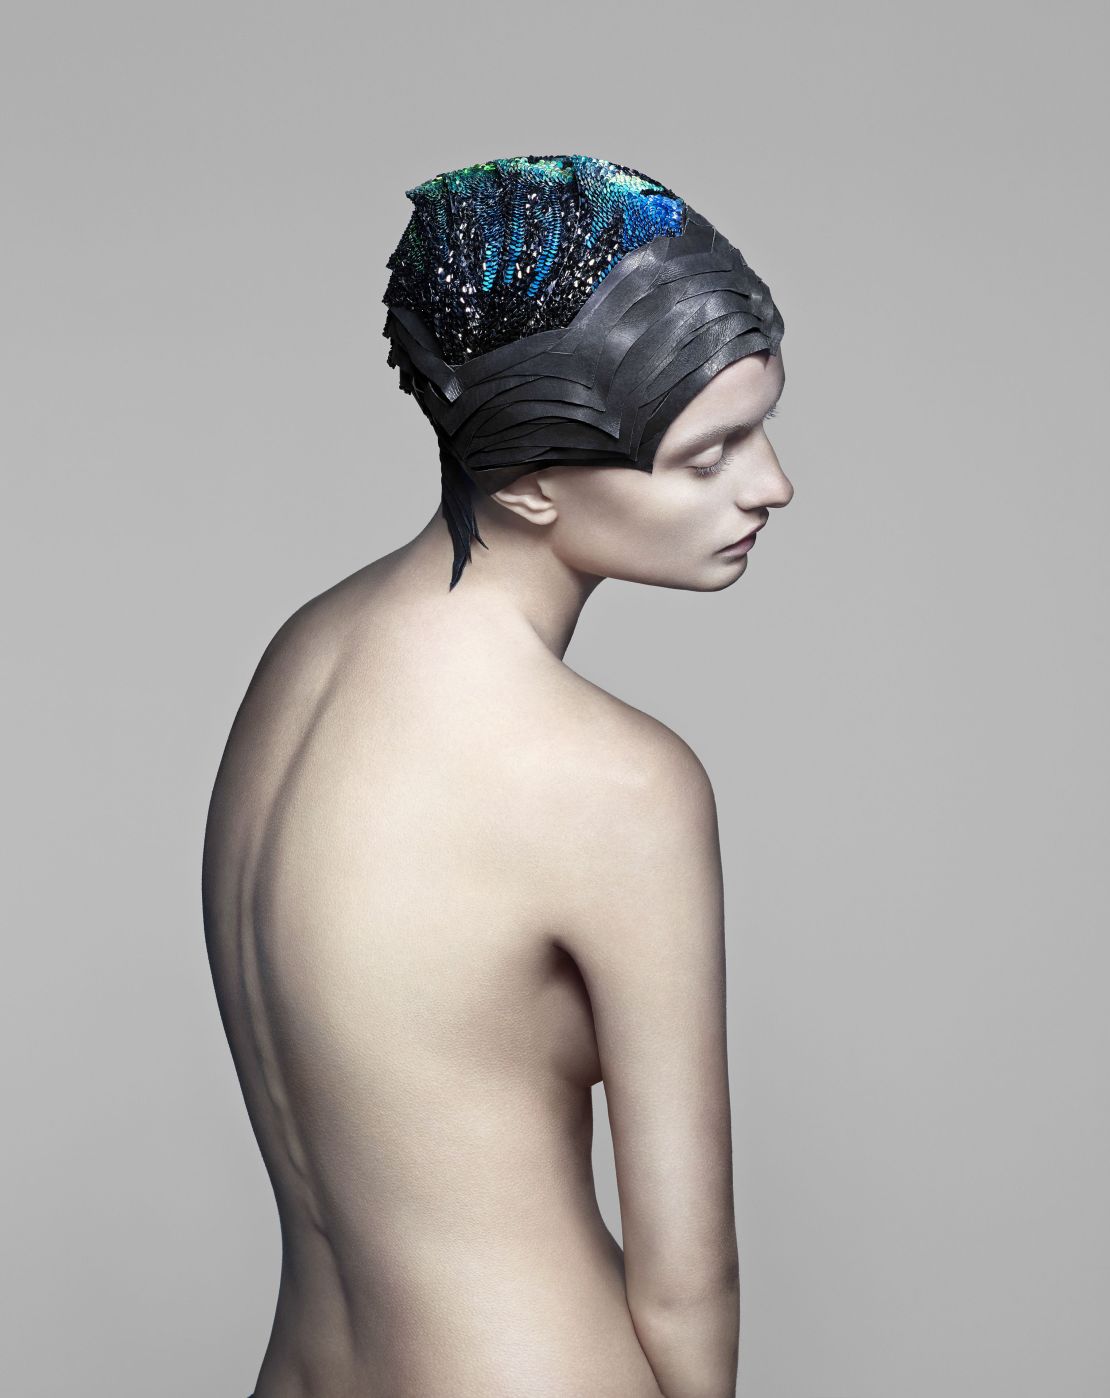 This headpiece, made of 4000 conductive Swarovski stones, changes color to correspond with localized brain activity.